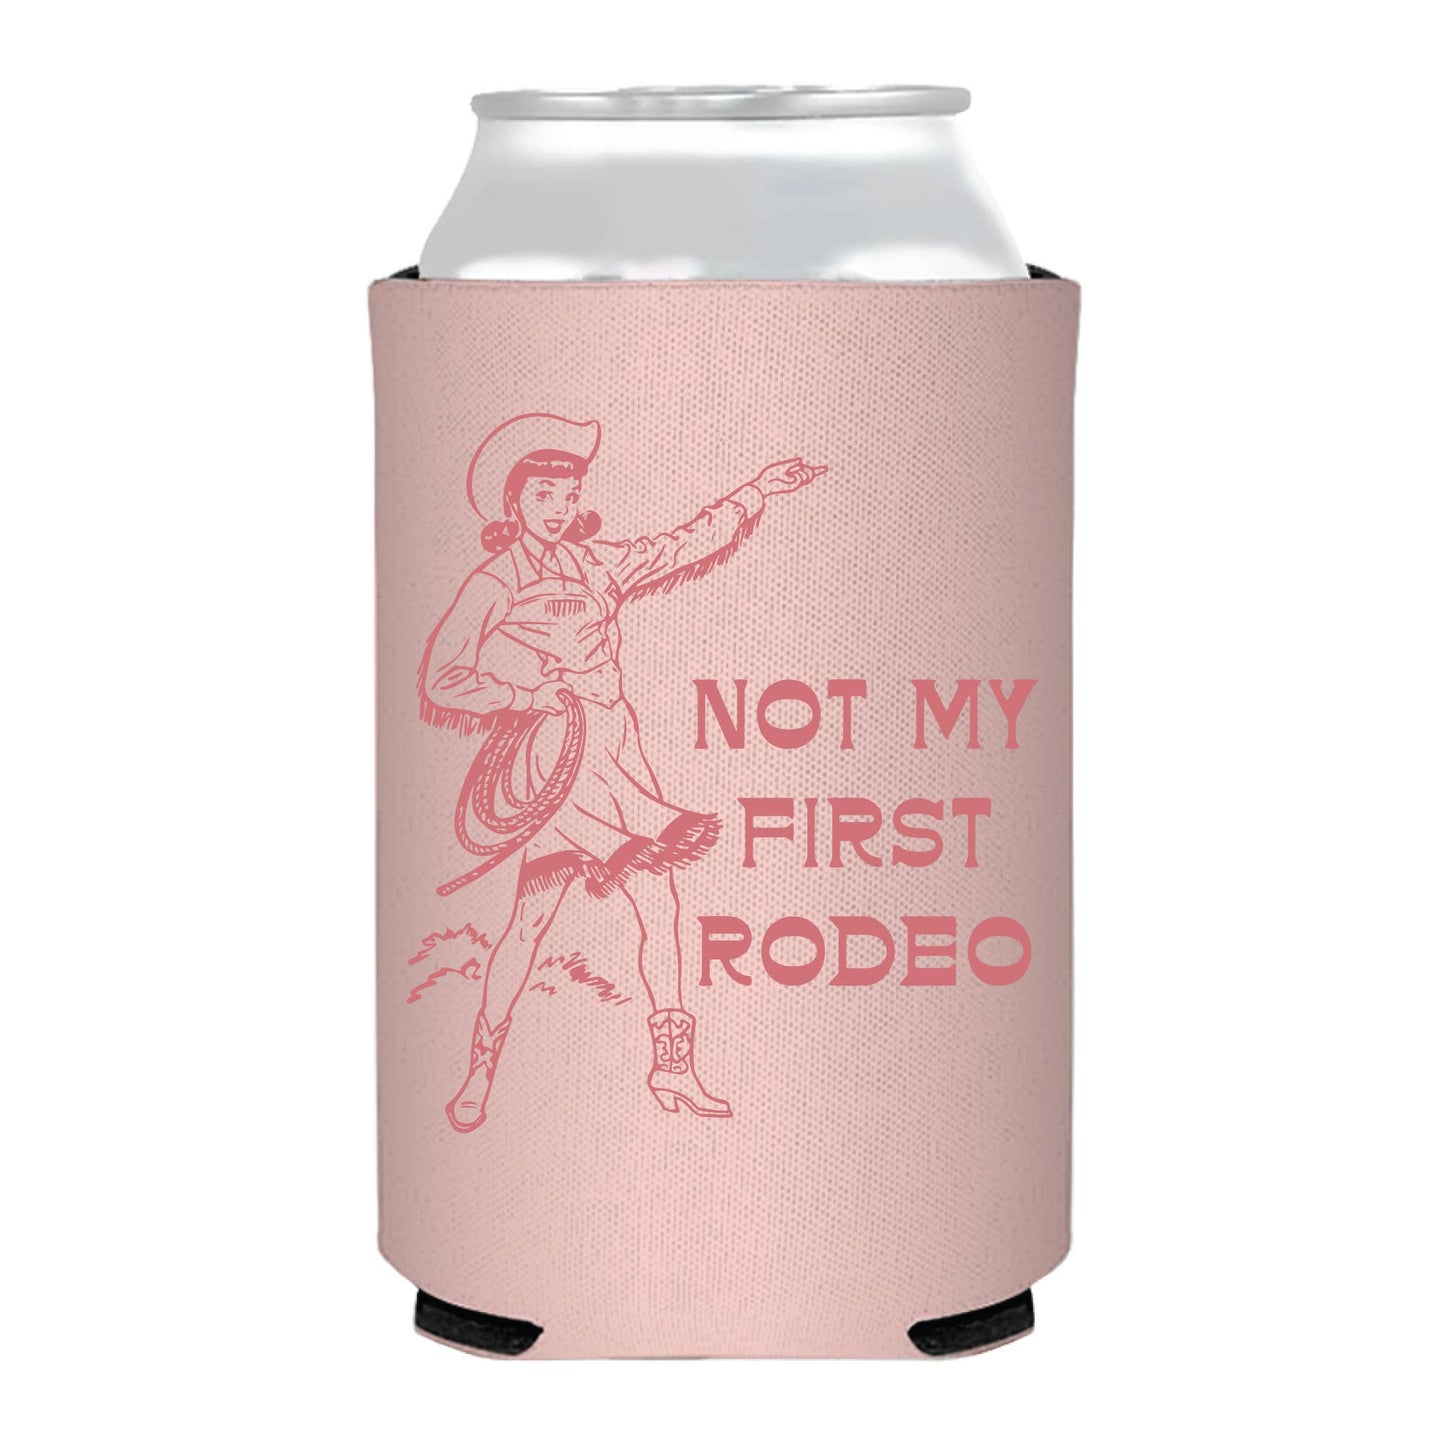 Sip Hip Hooray Coolie - Can - Drink Not My First Rodeo Can Cooler- Rodeo